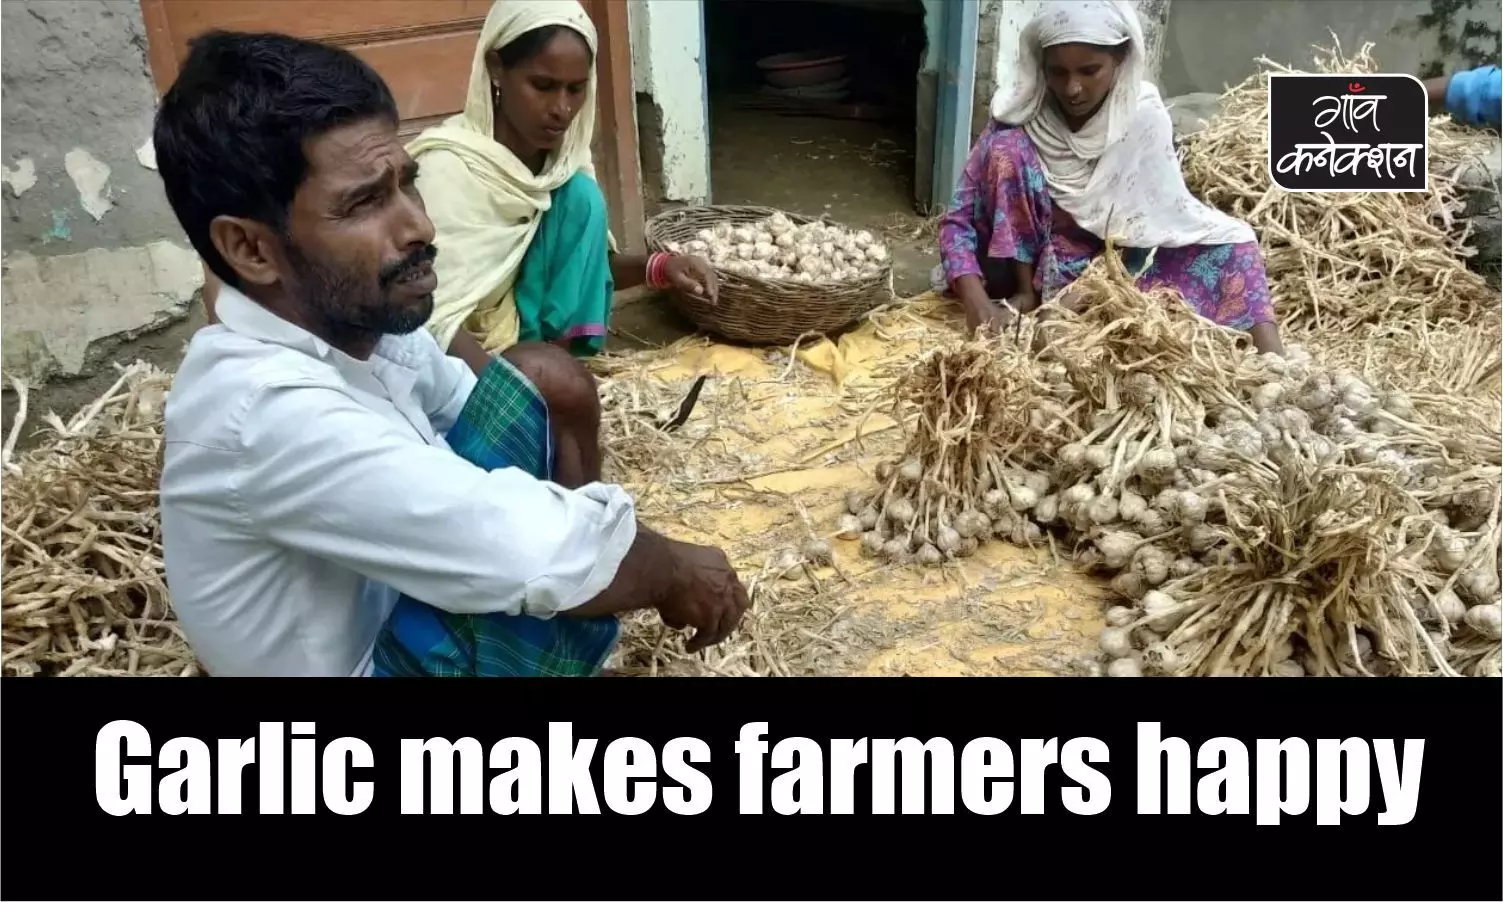 Farmers heave a sigh of relief as record-high prices of garlic spice up their lives